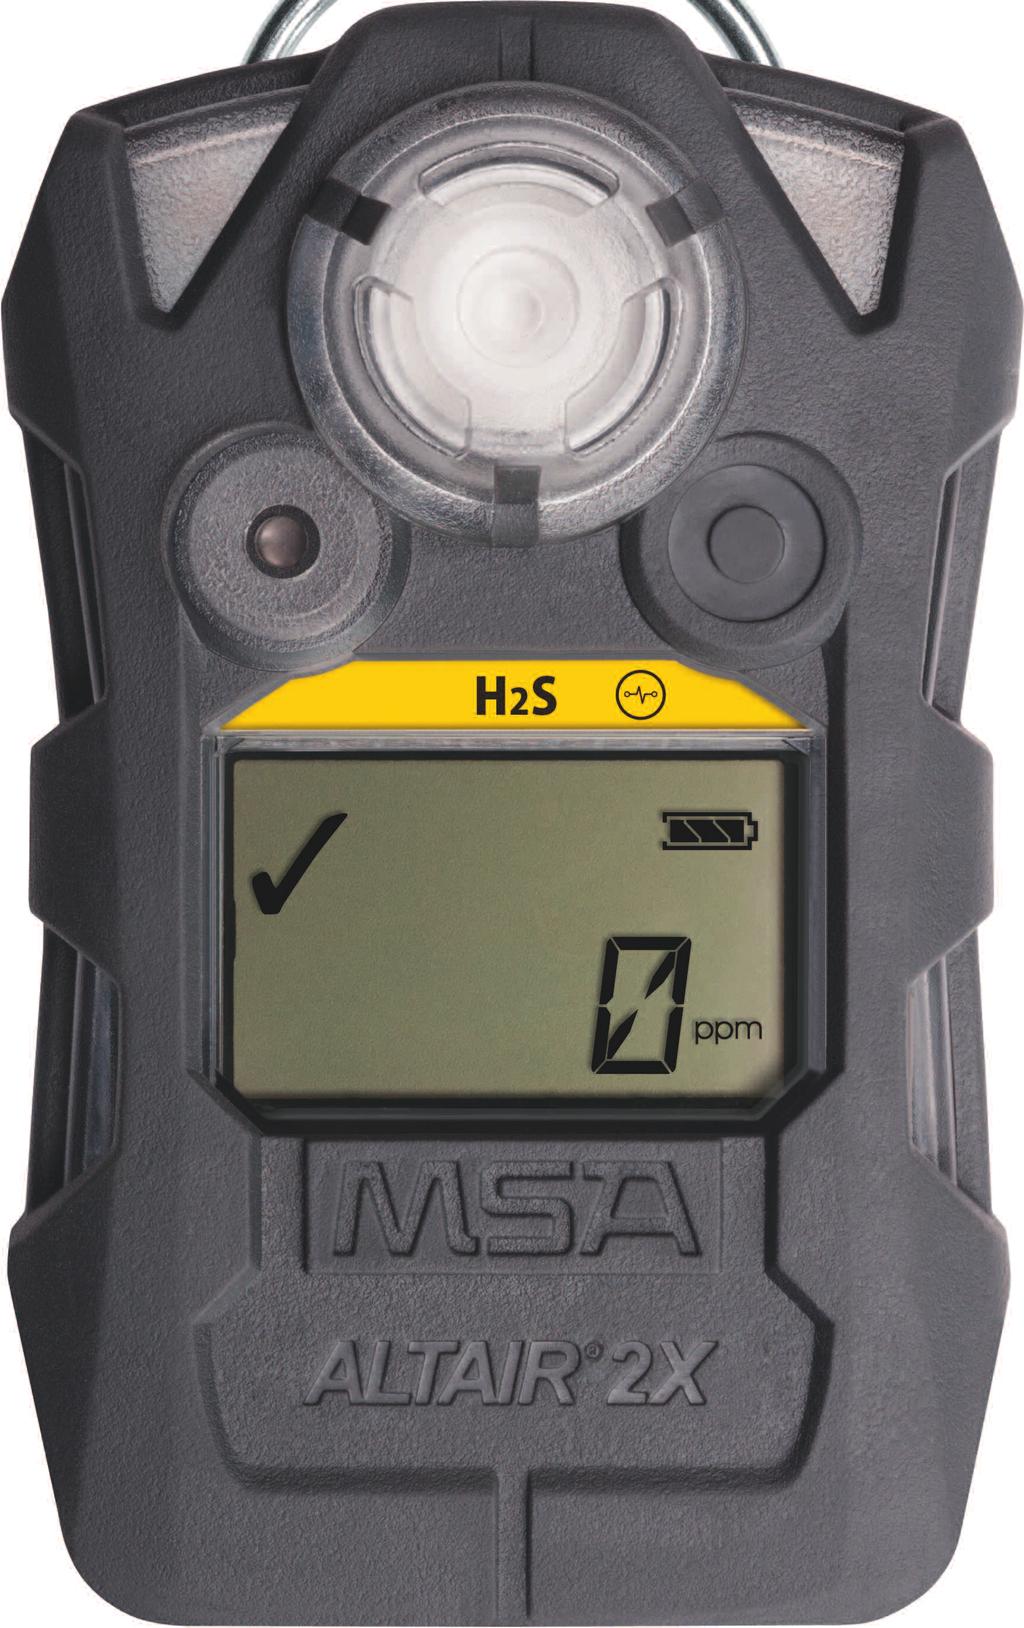 Withstands extreme impacts with rugged polycarbonate housing and passes 25-foot drop test ip 67-rated altair 2X is both dust tight and water tight minimal rf interference Full three-year warranty